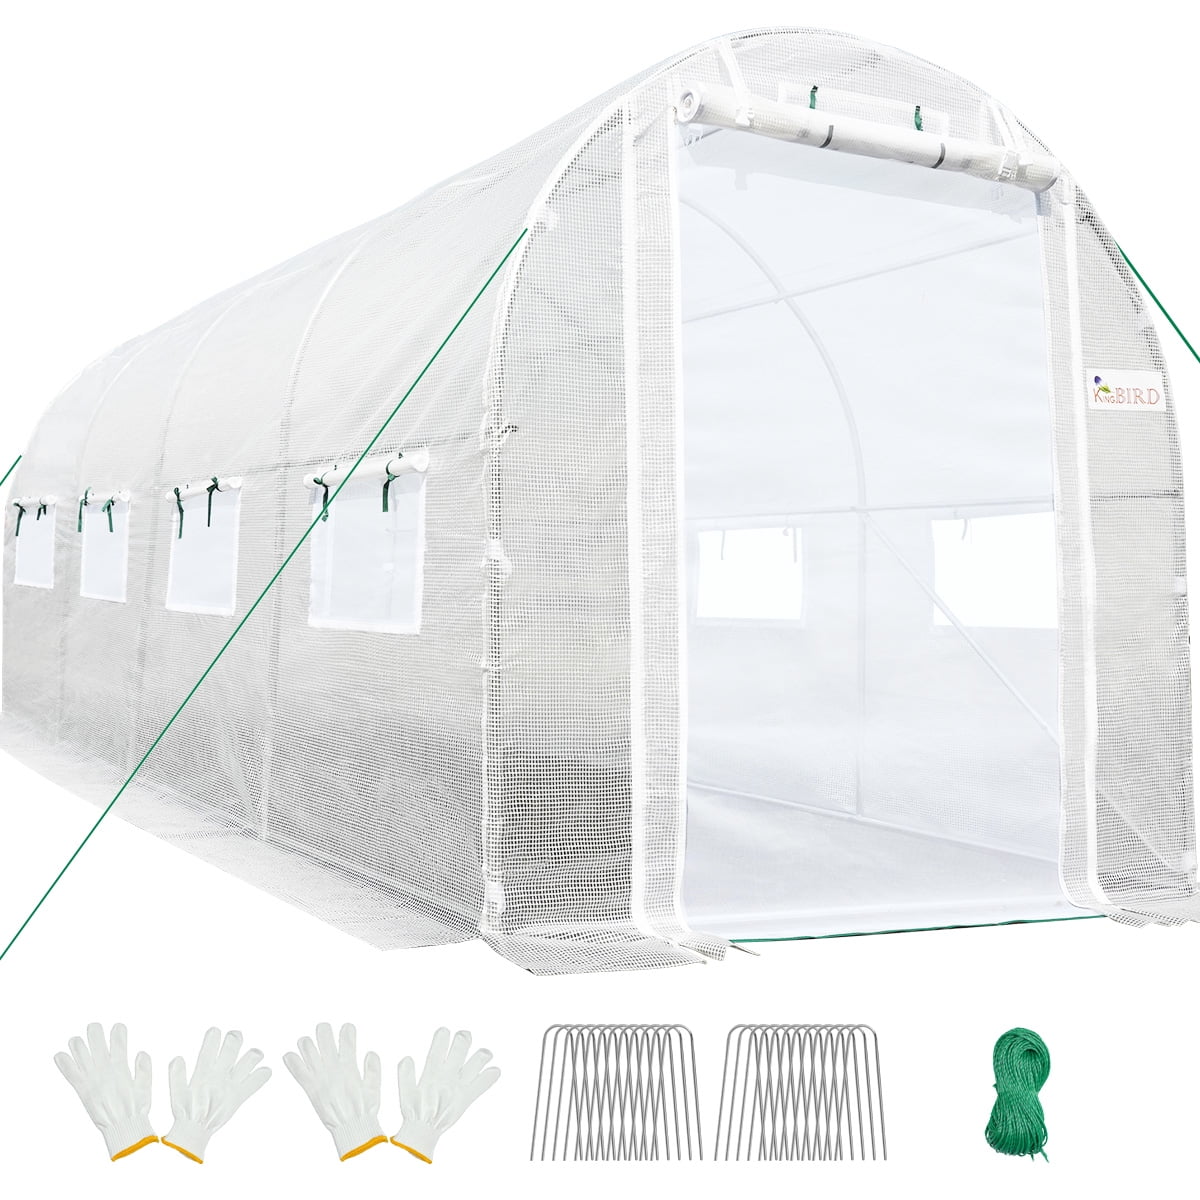 KING BIRD 15x6.6x6.6FT Upgraded Large Walk-in Greenhouse Heavy Duty Galvanized Steel Frame 2 Zippered Screen Doors 8 Screen Windows Tunnel Garden Plant Hot Green House 20 Stakes 4 Ropes 2 Gloves White 